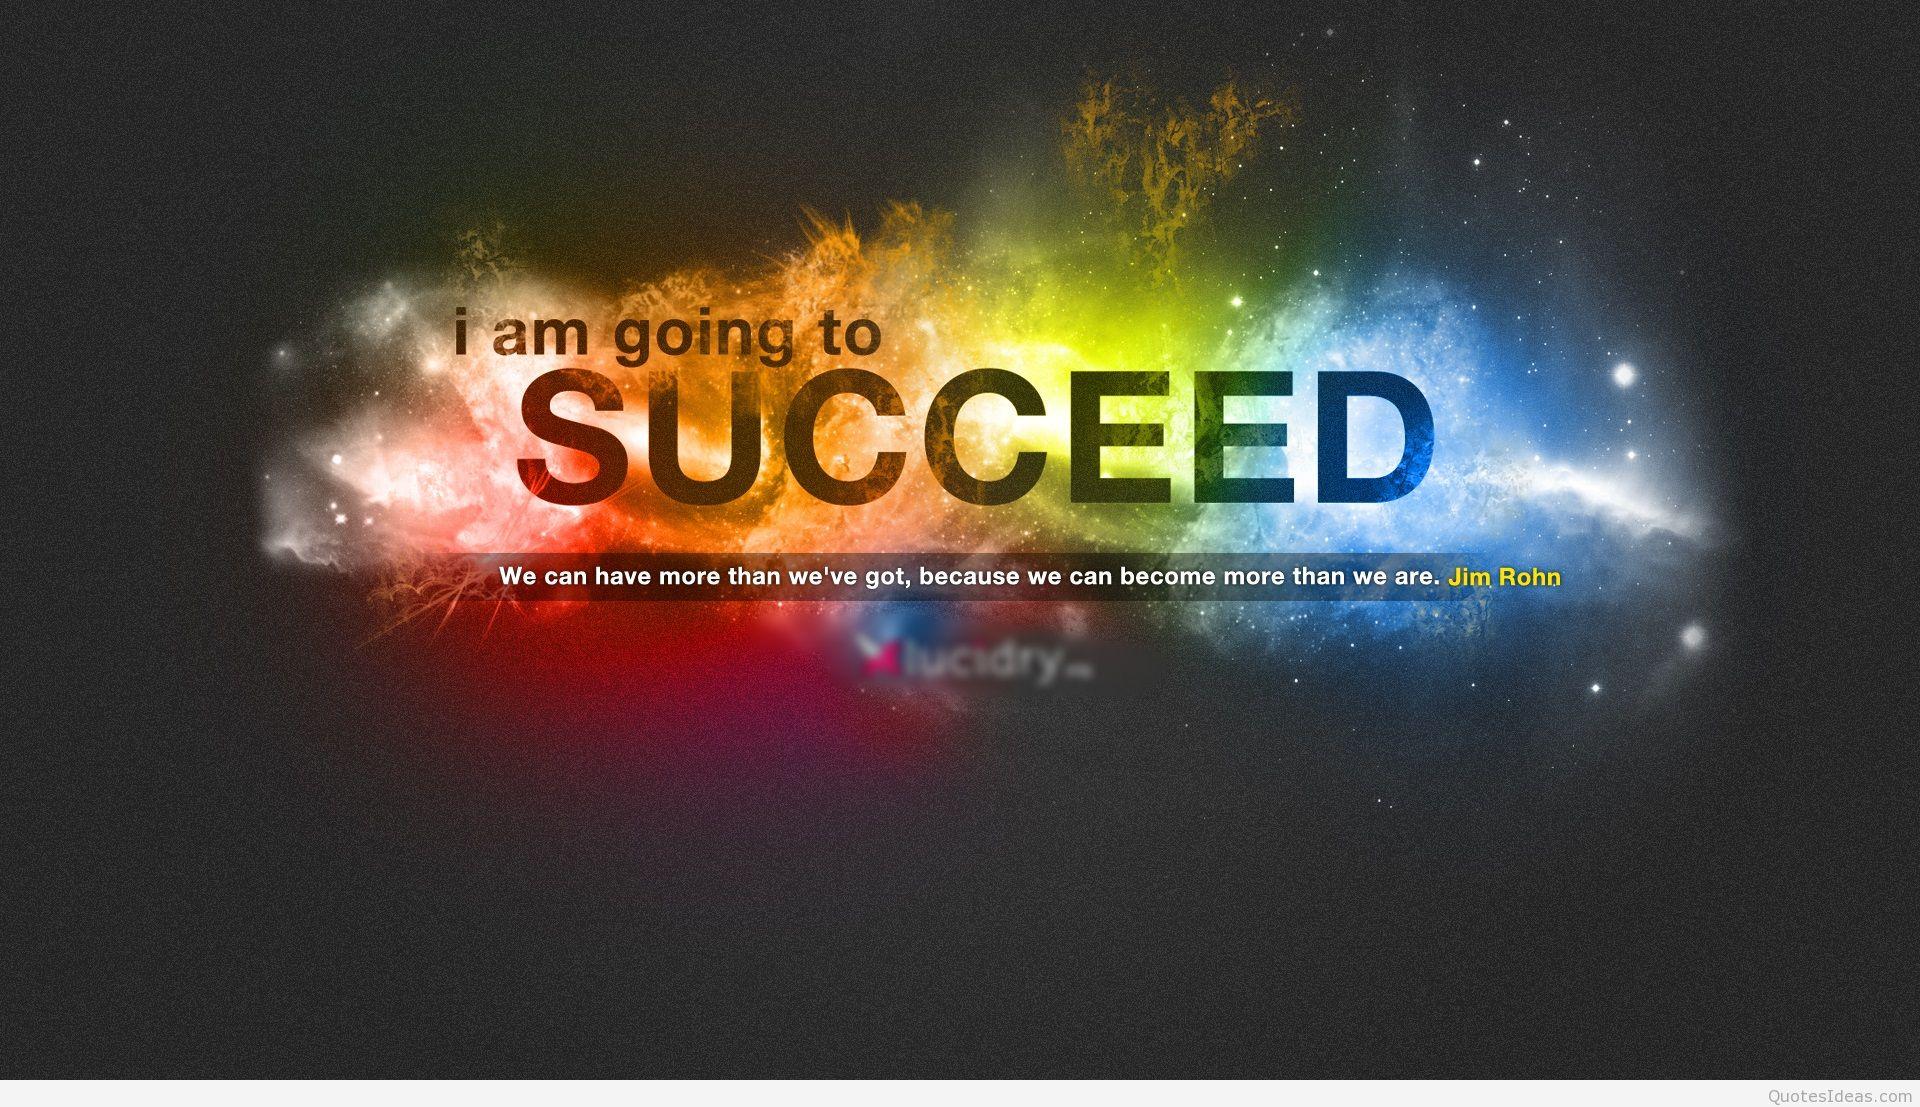 Succed motivational quote new HD wallpaper